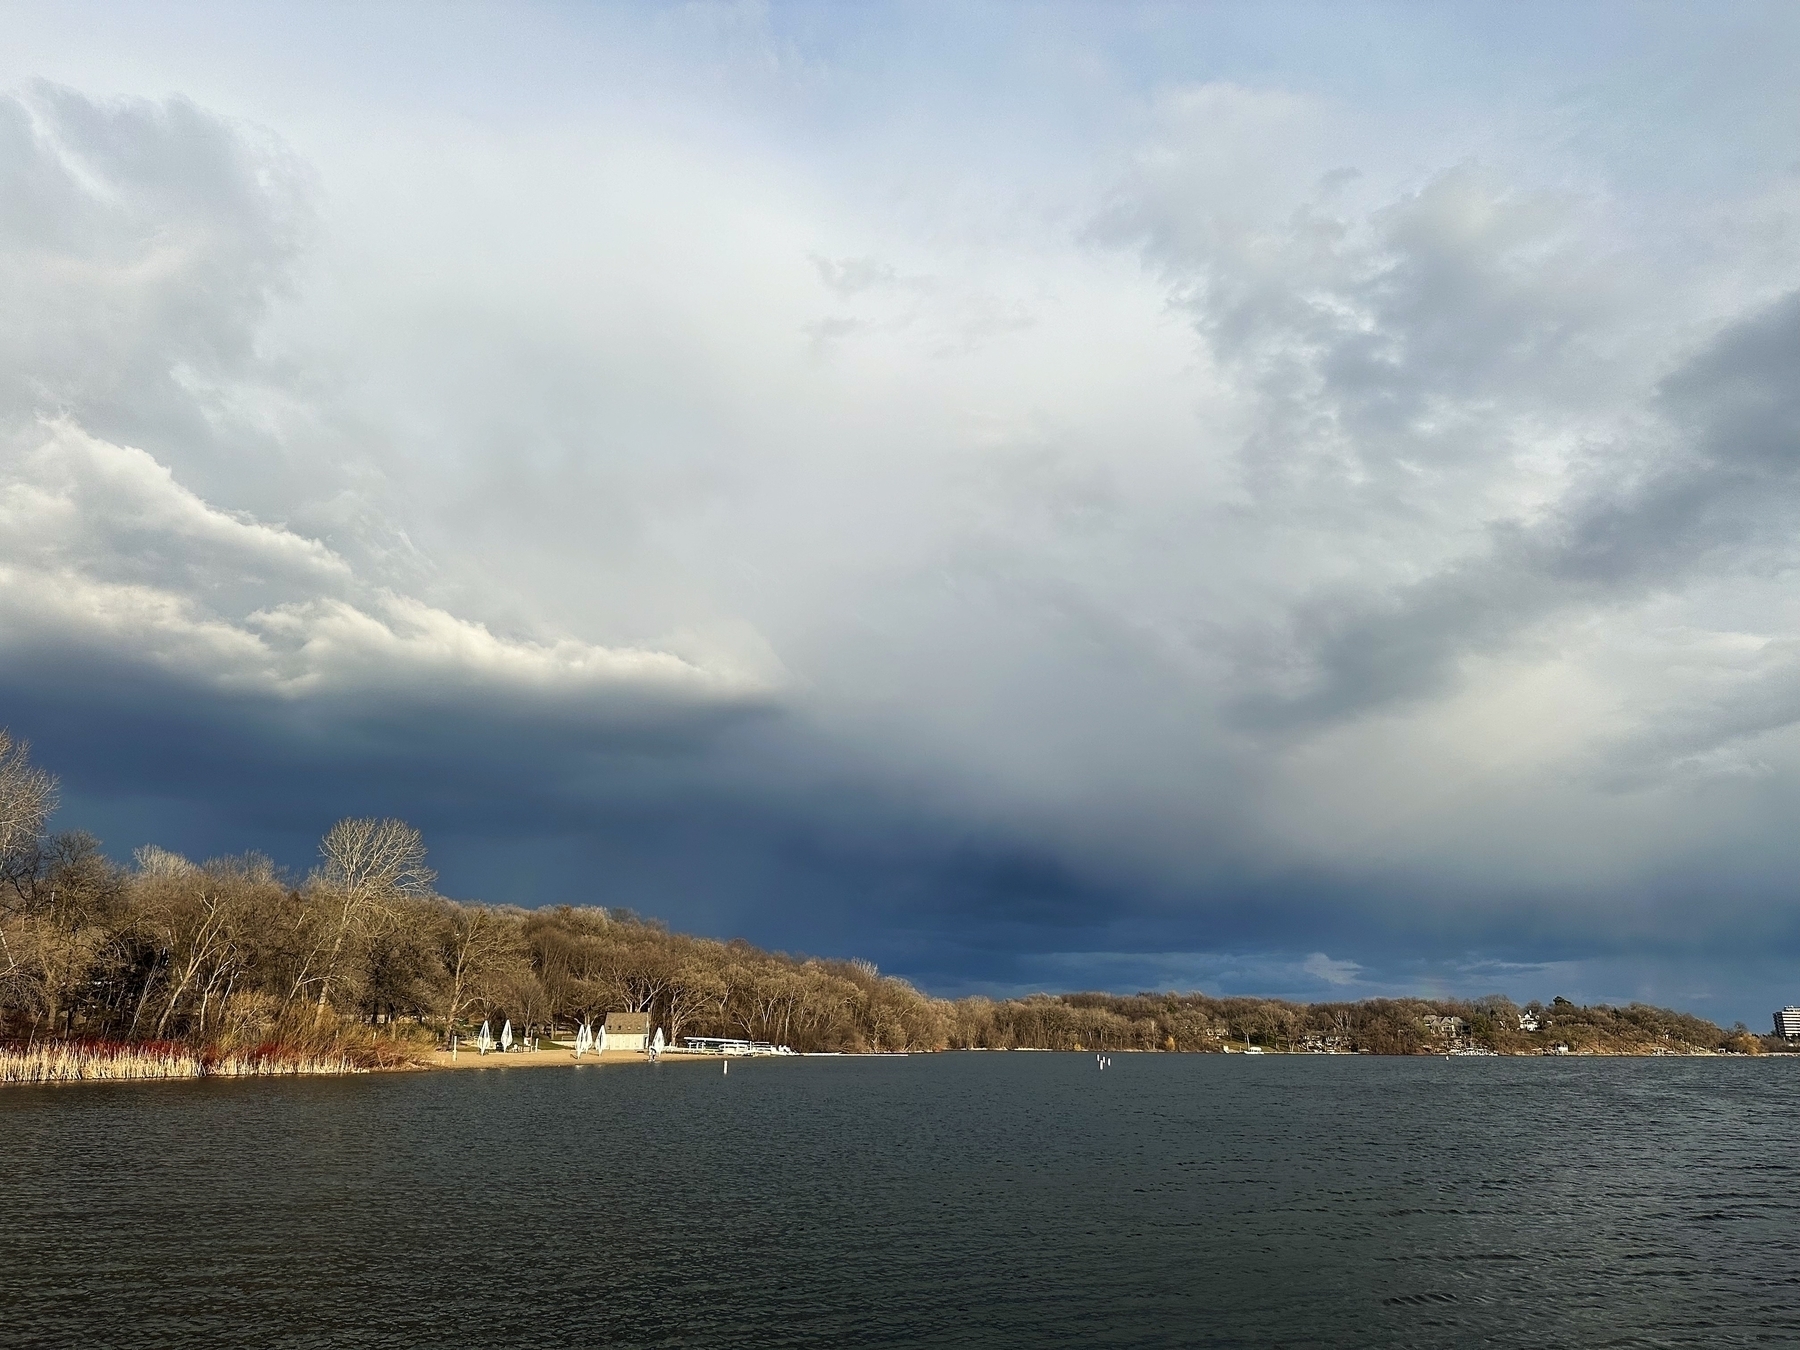 Overcast sky looms above a calm lake with bare trees and distant buildings lining the shore, suggesting an impending storm in a serene natural setting.